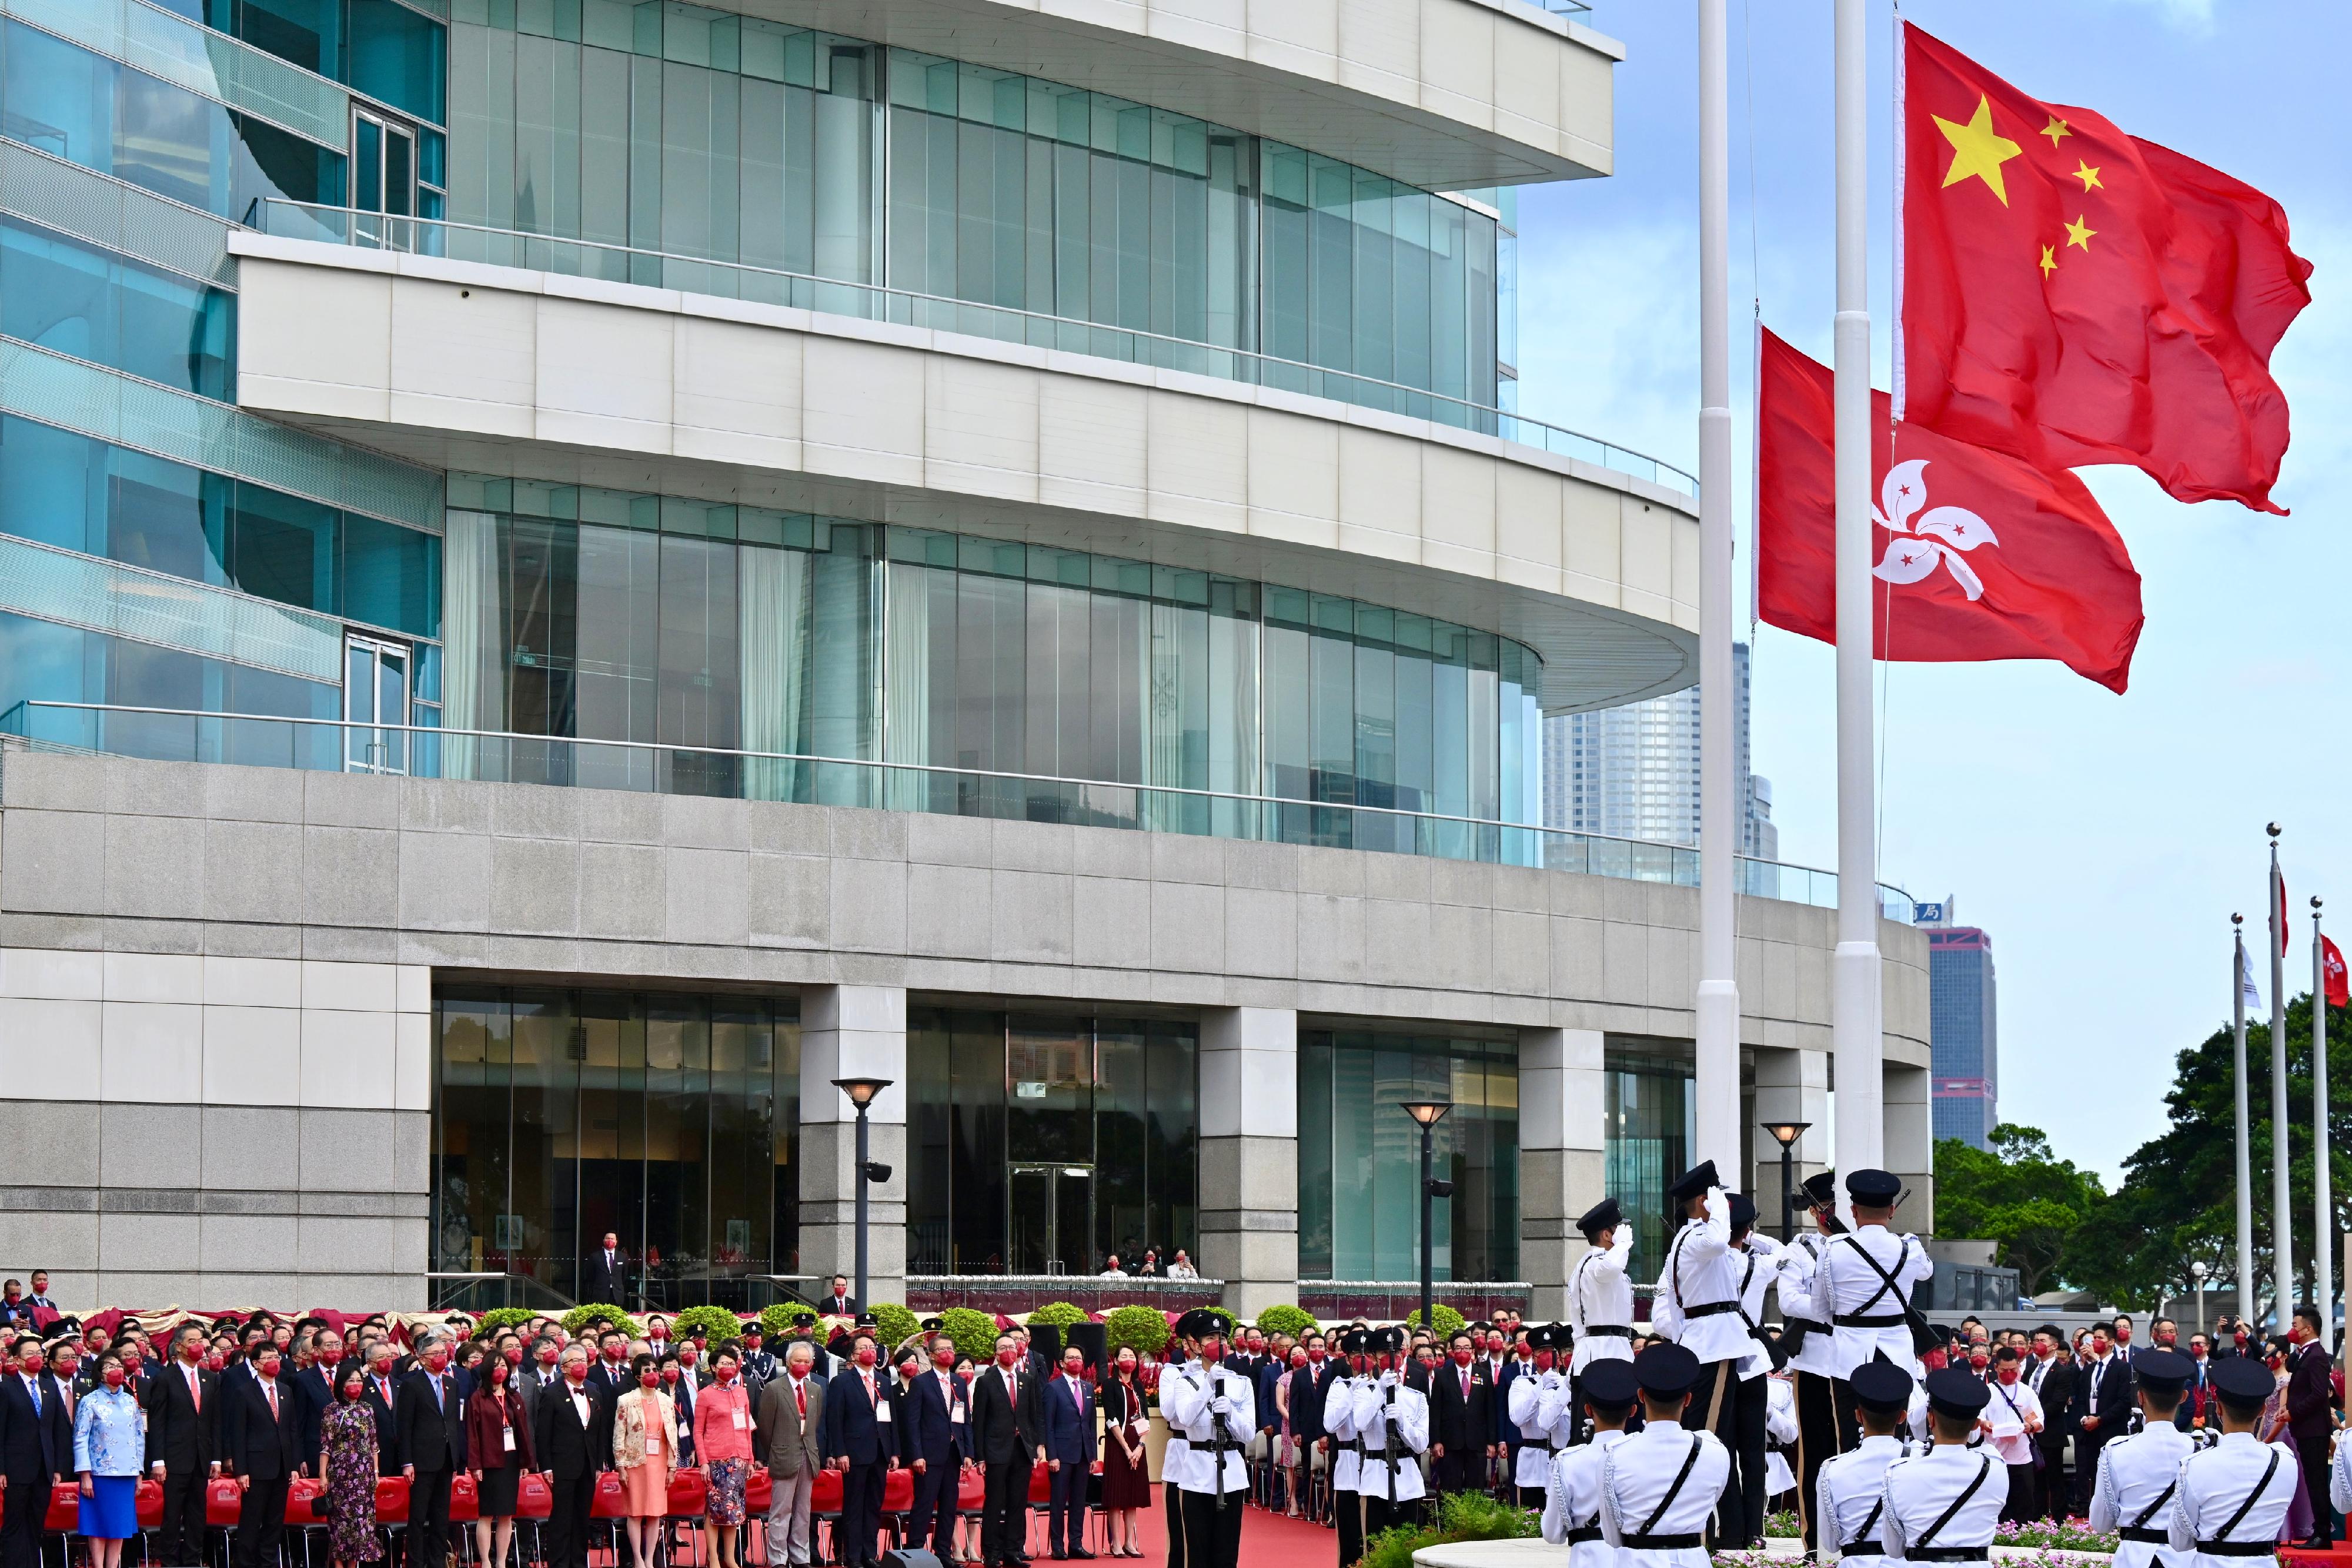 The Chief Executive, Mr John Lee, together with Principal Officials and guests, attends the flag-raising ceremony for the 73rd anniversary of the founding of the People's Republic of China at Golden Bauhinia Square in Wan Chai this morning (October 1). Photo shows (front row, from first left) Deputy Director of the Liaison Office of the Central People's Government in the Hong Kong Special Administrative Region (HKSAR) Mr He Jing; Vice-Chairman of the National Committee of the Chinese People's Political Consultative Conference Mr C Y Leung, and his wife, Mrs Regina Leung; Mr Lee and his wife Mrs Lee; the Chief Justice of the Court of Final Appeal, Mr Andrew Cheung Kui-nung, and his wife; former Chief Executive Mr Donald Tsang and his wife, Mrs Selina Tsang; former Chief Executive Mrs Carrie Lam and her husband, Mr Lam Siu-por; the Chief Secretary for Administration, Mr Chan Kwok-ki; the Financial Secretary, Mr Paul Chan; and the Secretary for Justice, Mr Paul Lam, SC, and other guests attending the ceremony.